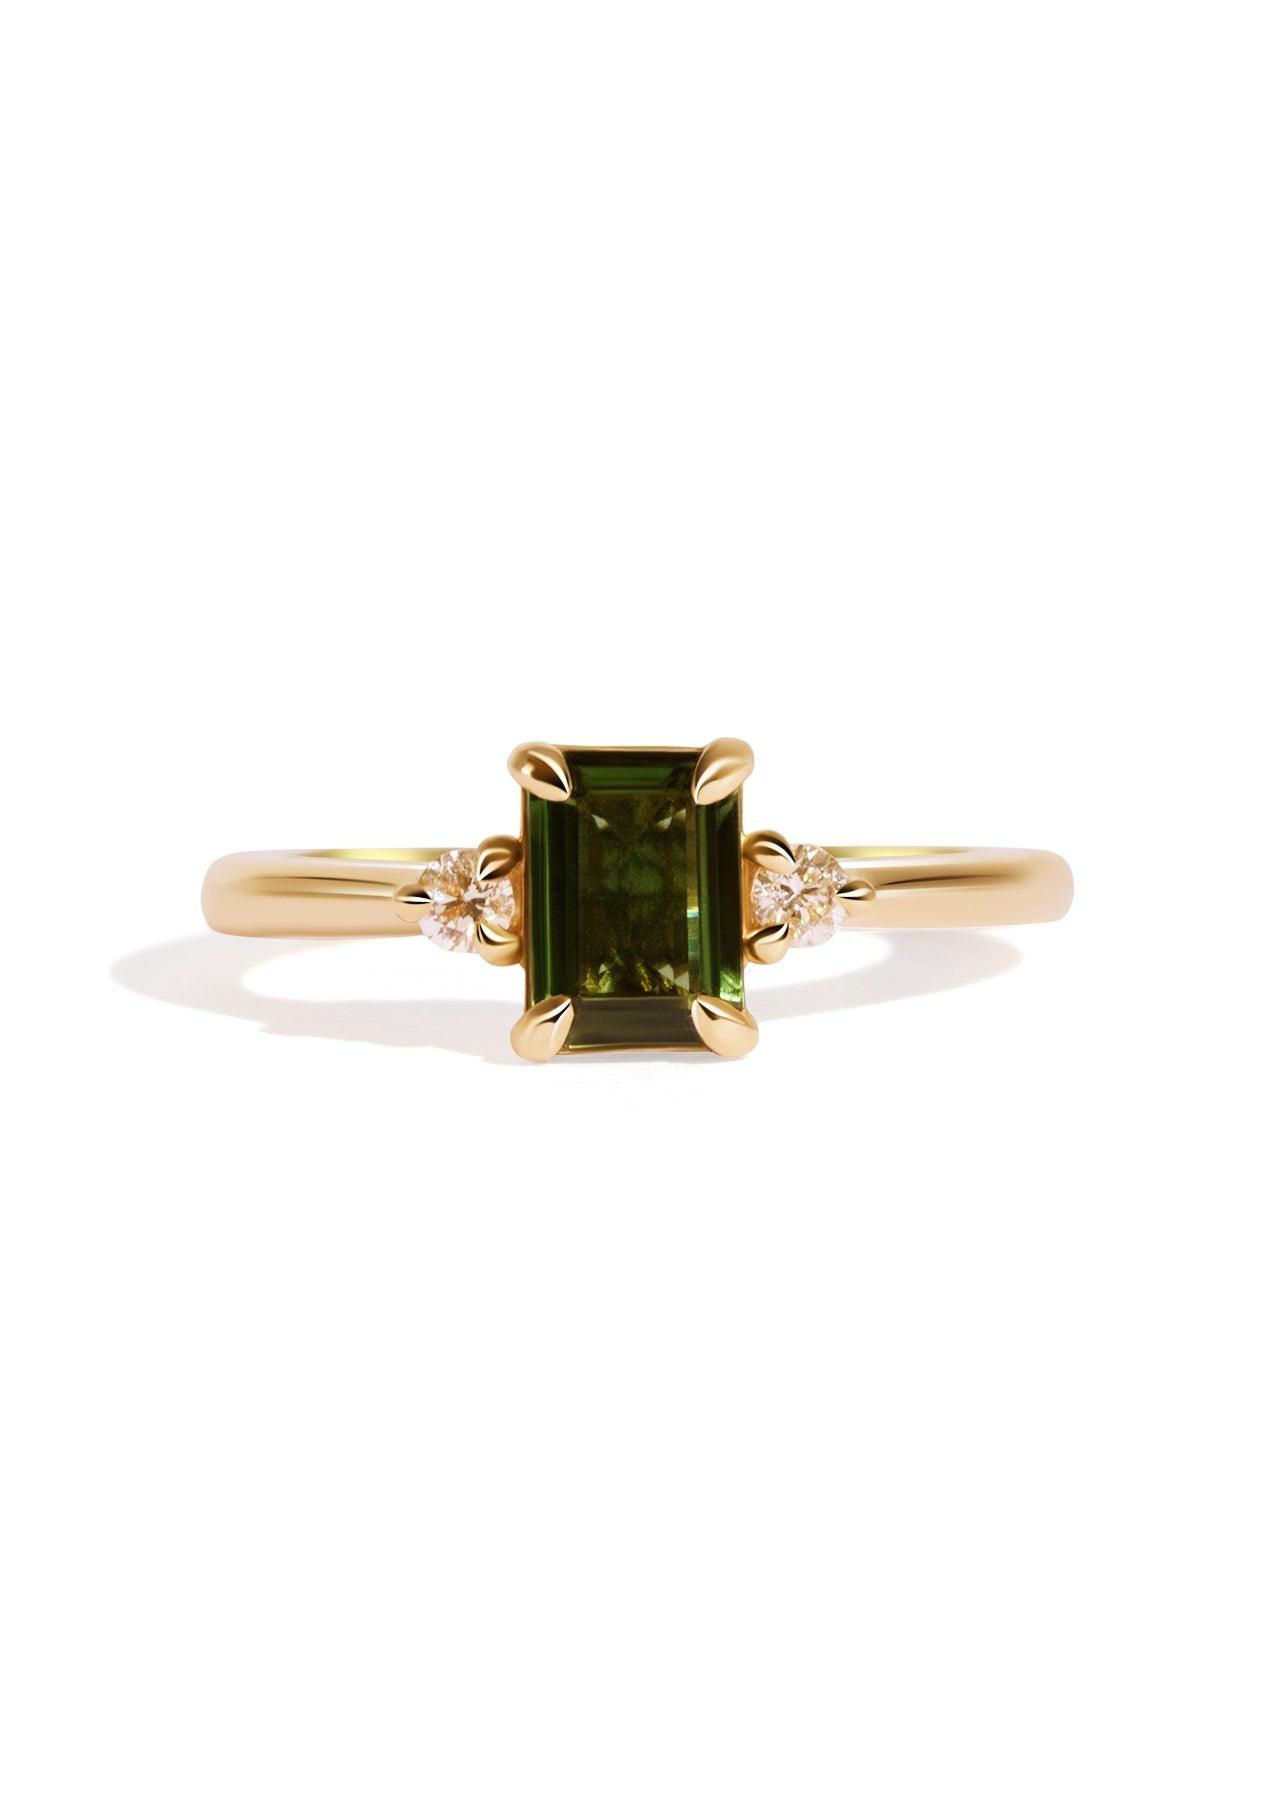 The Ada 1.23ct Green Sapphire Ring